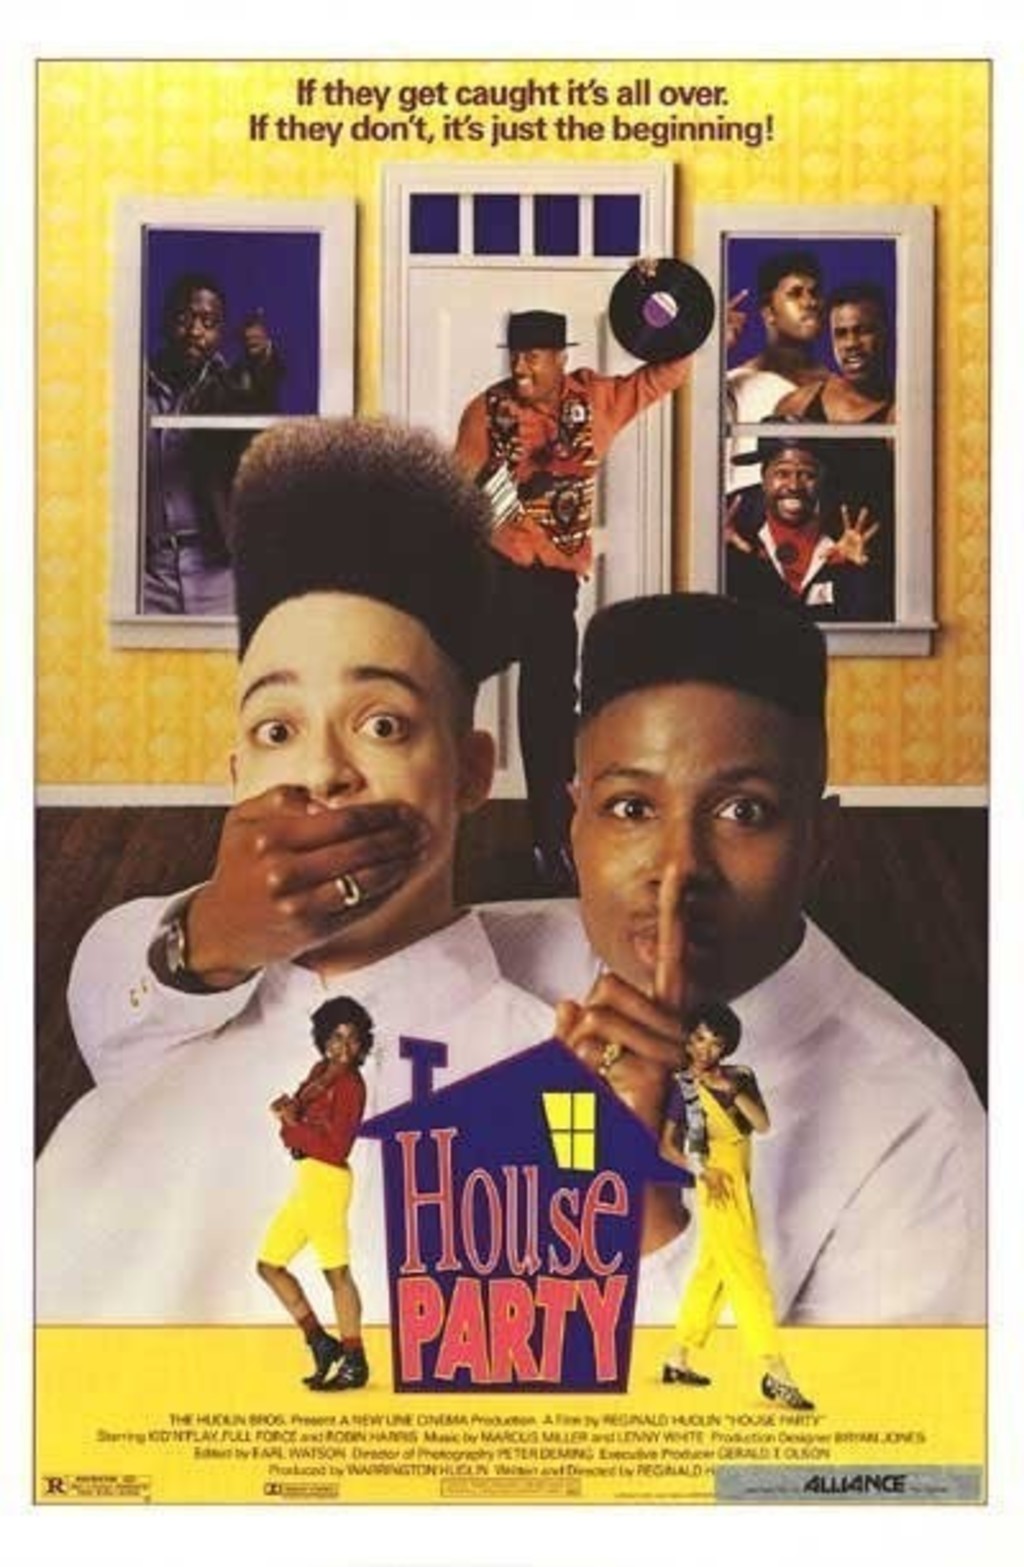 Watch House Party on Netflix Today!